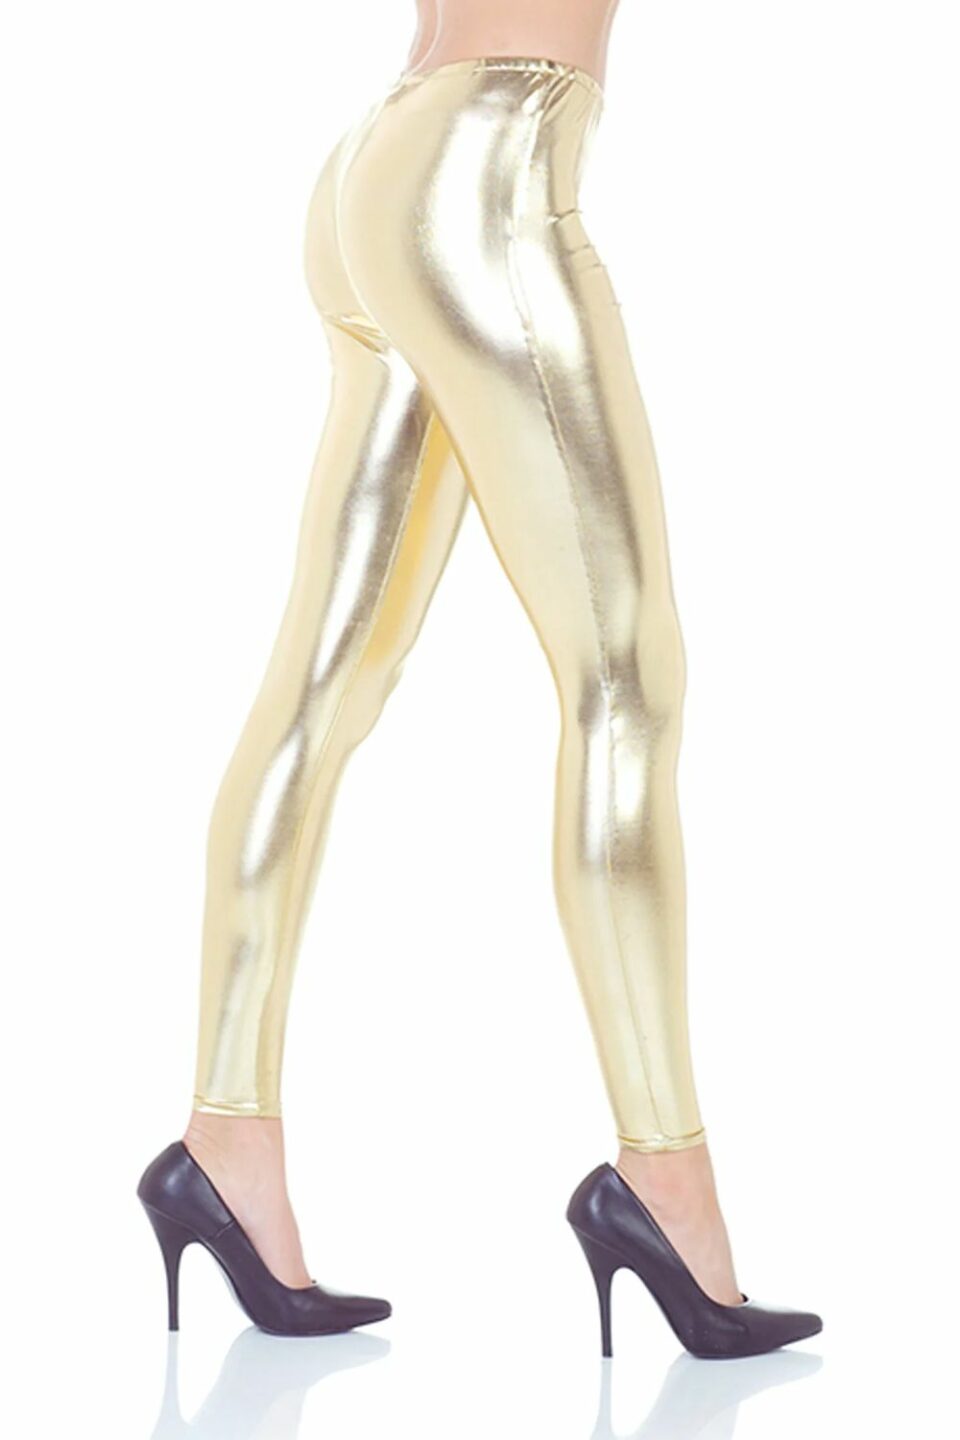 Leggings shiny gold with glitter effect (18 months-5 years) - Alouette |  Βρεφικά & Παιδικά Ρούχα